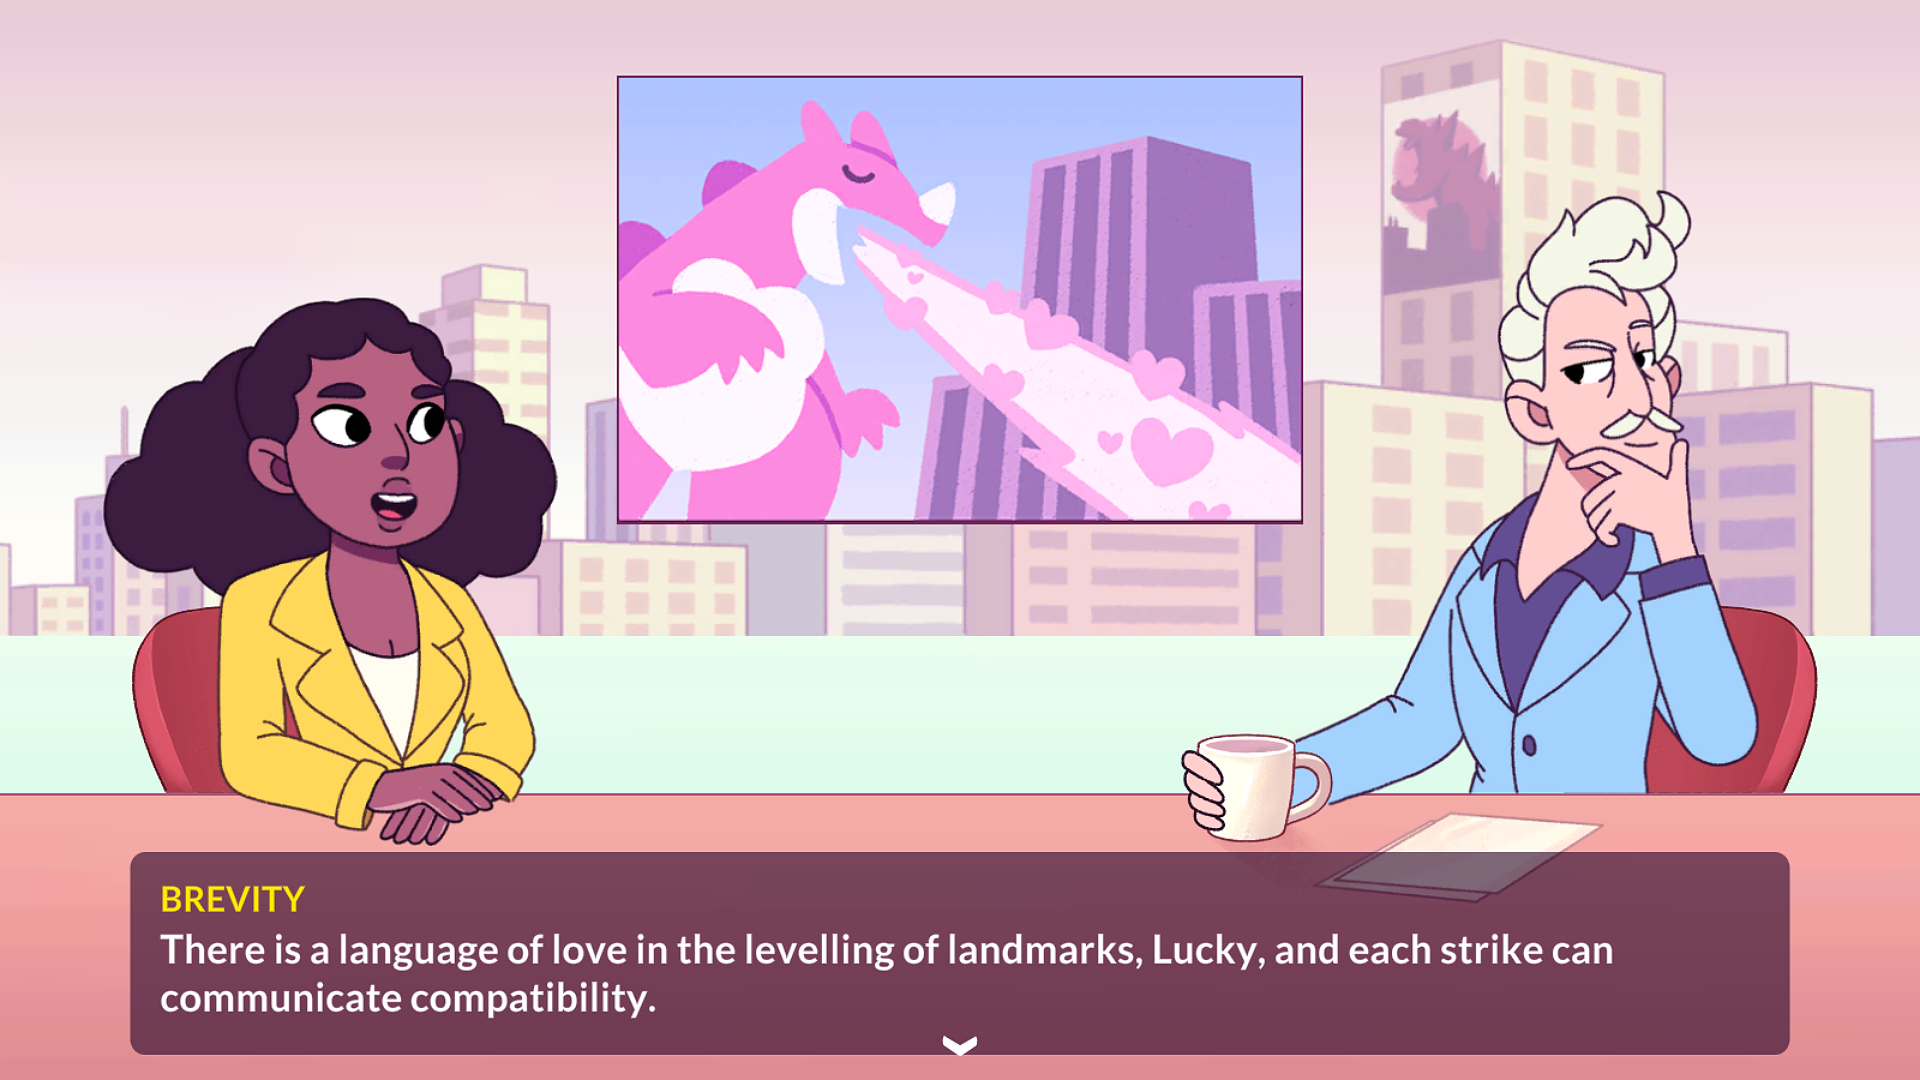 Screenshot from Kaichu - A Kaiju Dating Sim. An illustration of two figures sitting at a table. The image of a reptilian-like creature is shooting a breath of fire peppered with hearts towards a group of buildings. Behind this image is a backdrop of a cityscape. A dialogue box appears on the bottom with the name Brevity, reading, "There is a language of love in the levelling of landmarks, Lucky, and each strike can communicate compatibility."